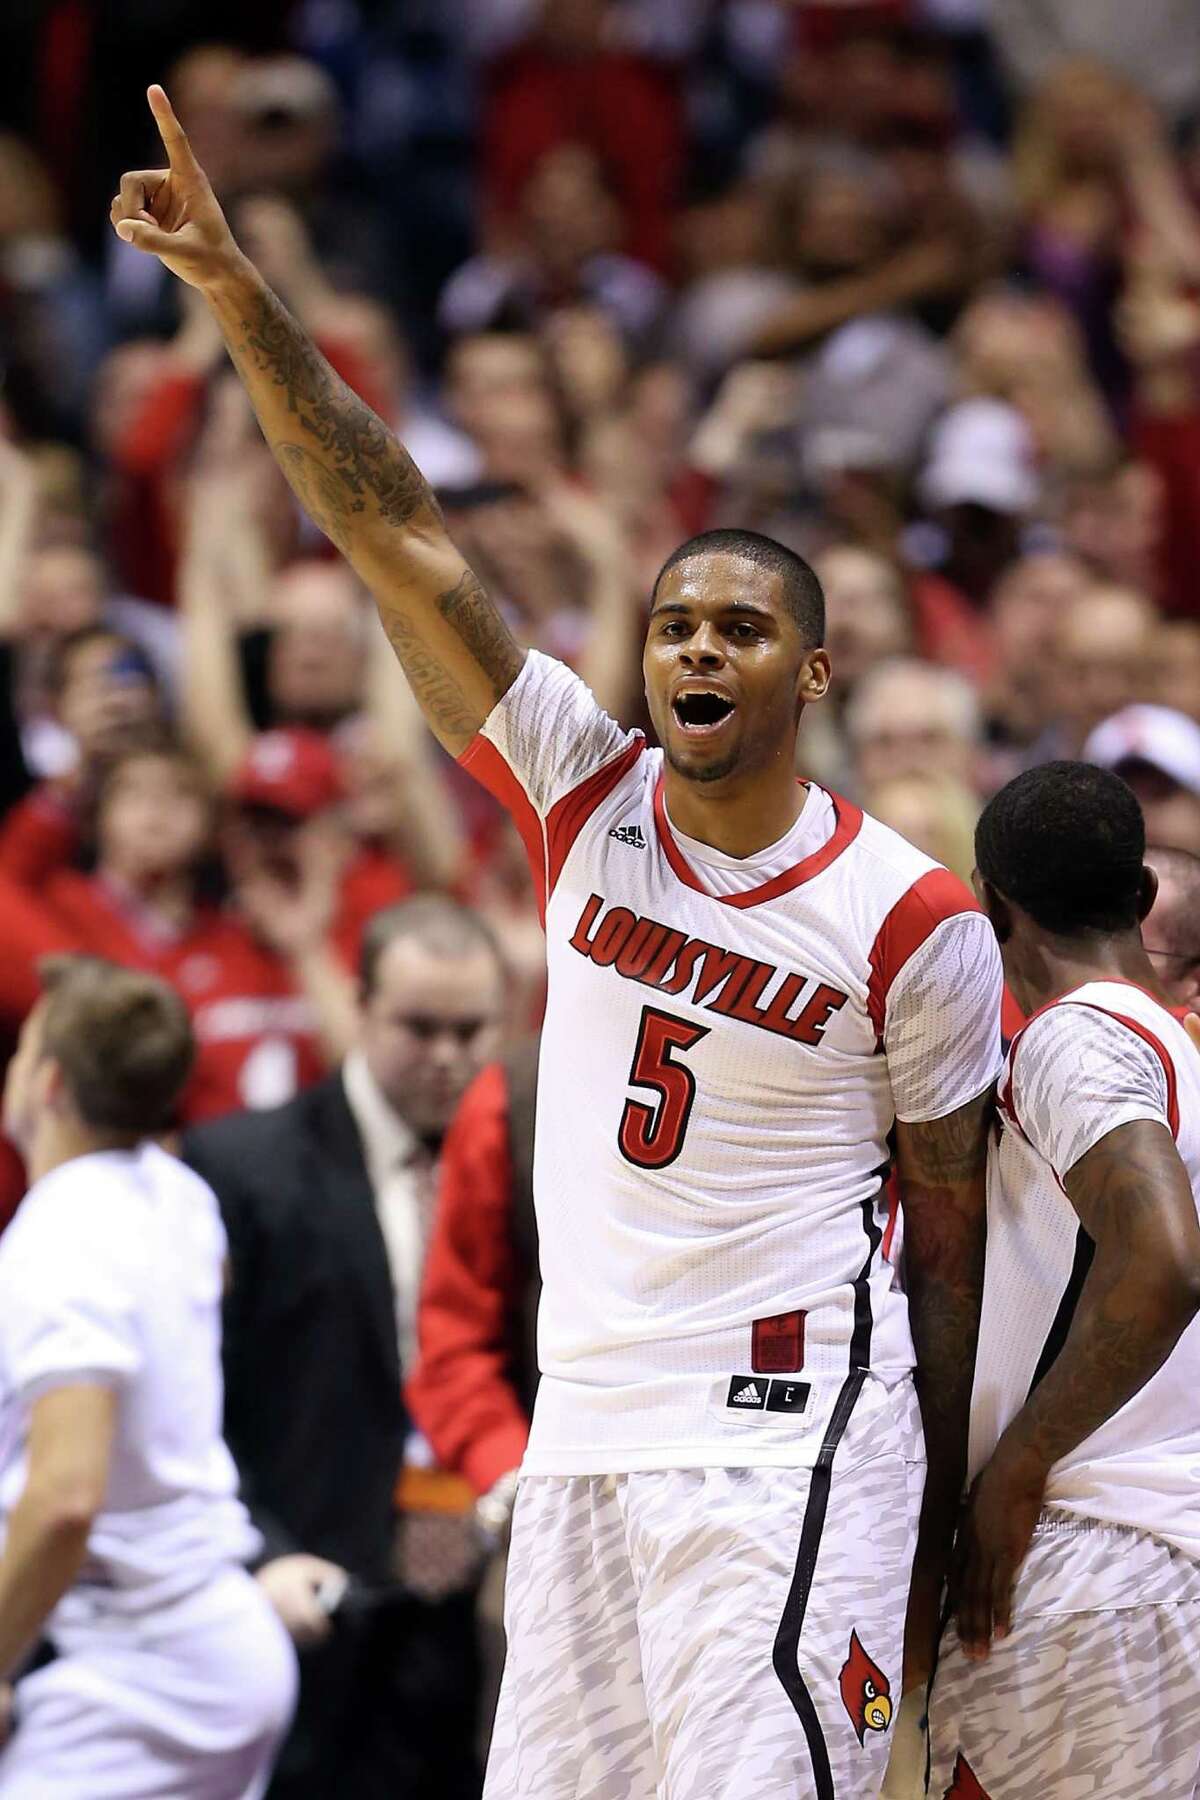 INDIANAPOLIS, IN - MARCH 31: Chane Behanan (wearing the #5 jersey belonging to teammate Kevin Ware) #21 of the Louisville Cardinals celebrates late in the second half against the Duke Blue Devils during the Midwest Regional Final round of the 2013 NCAA Men's Basketball Tournament at Lucas Oil Stadium on March 31, 2013 in Indianapolis, Indiana. Ware suffered a compound leg fracture in the first half. (Photo by Andy Lyons/Getty Images)